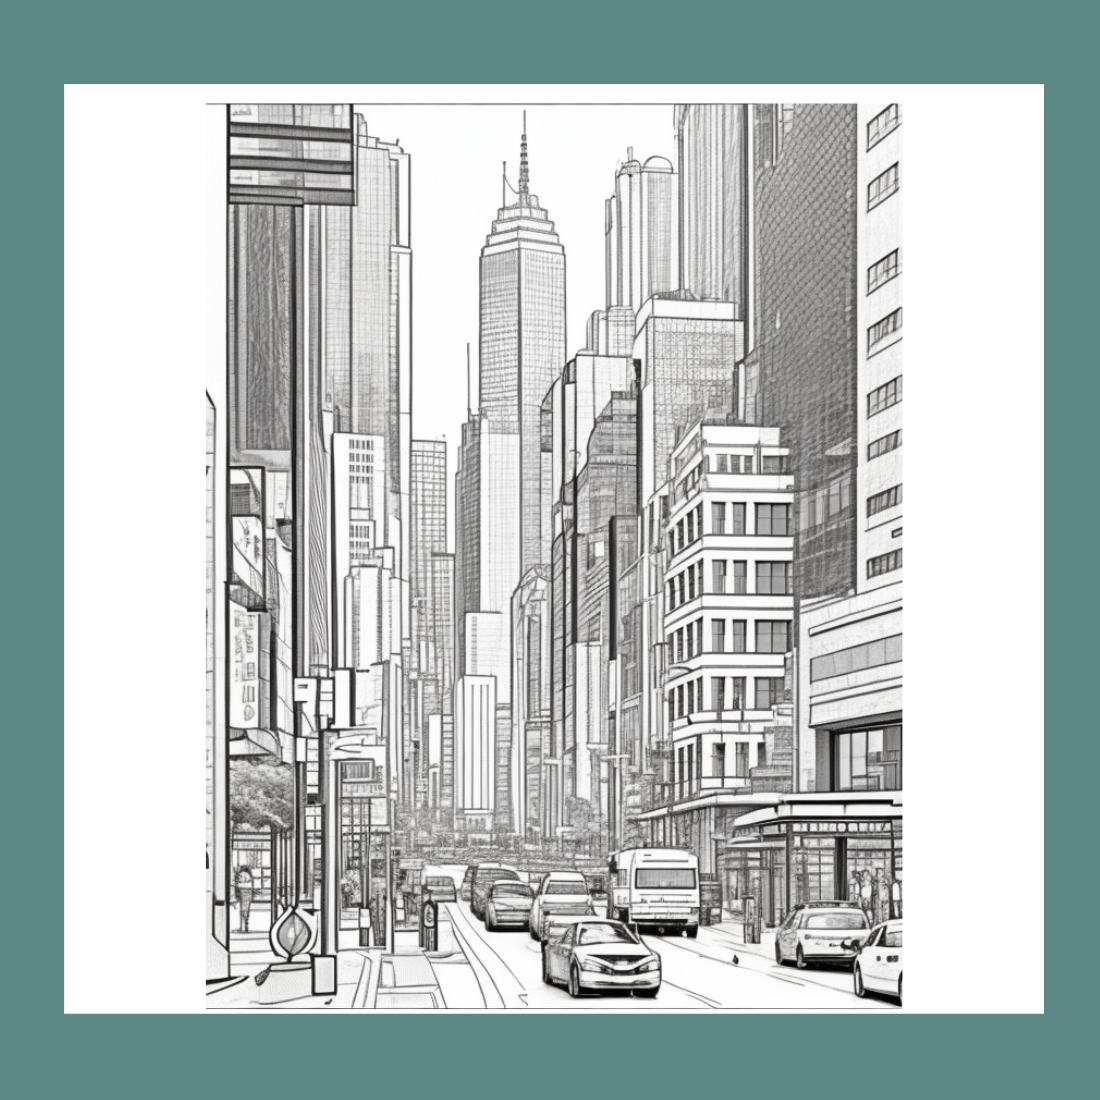 A cityscape with skyscrapers and a busy street scene coloring page 6 preview image.